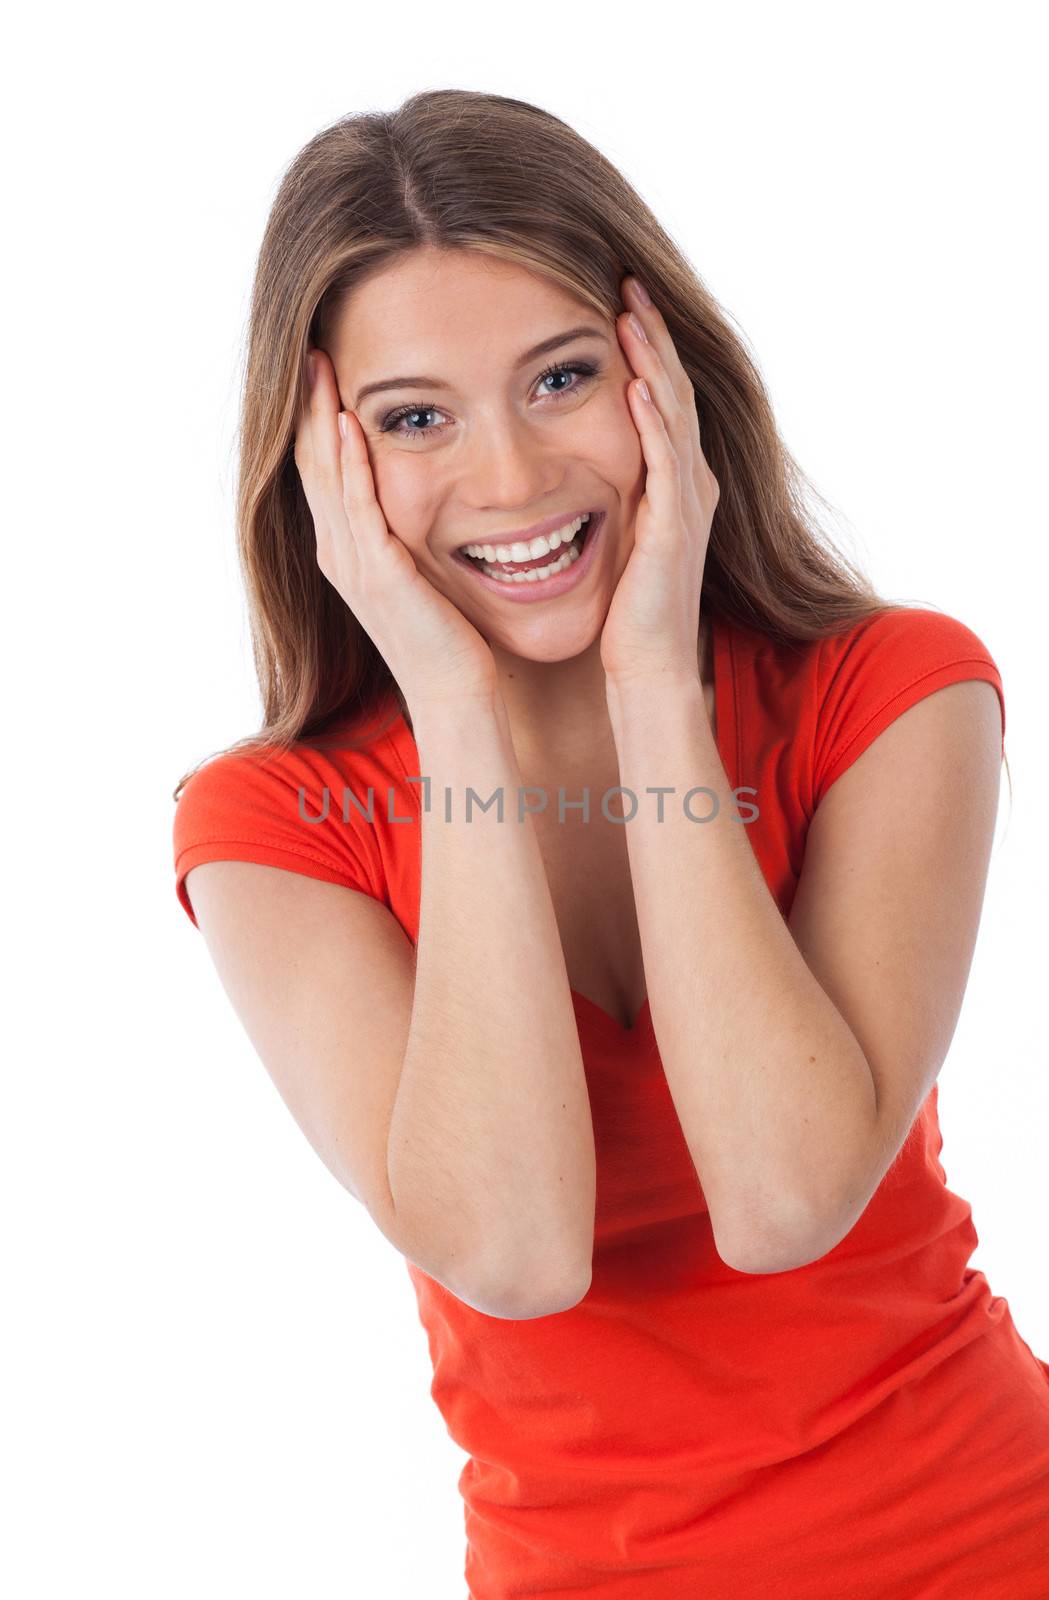 Cheerful woman surprised and holding her face with her hands, isolated on white